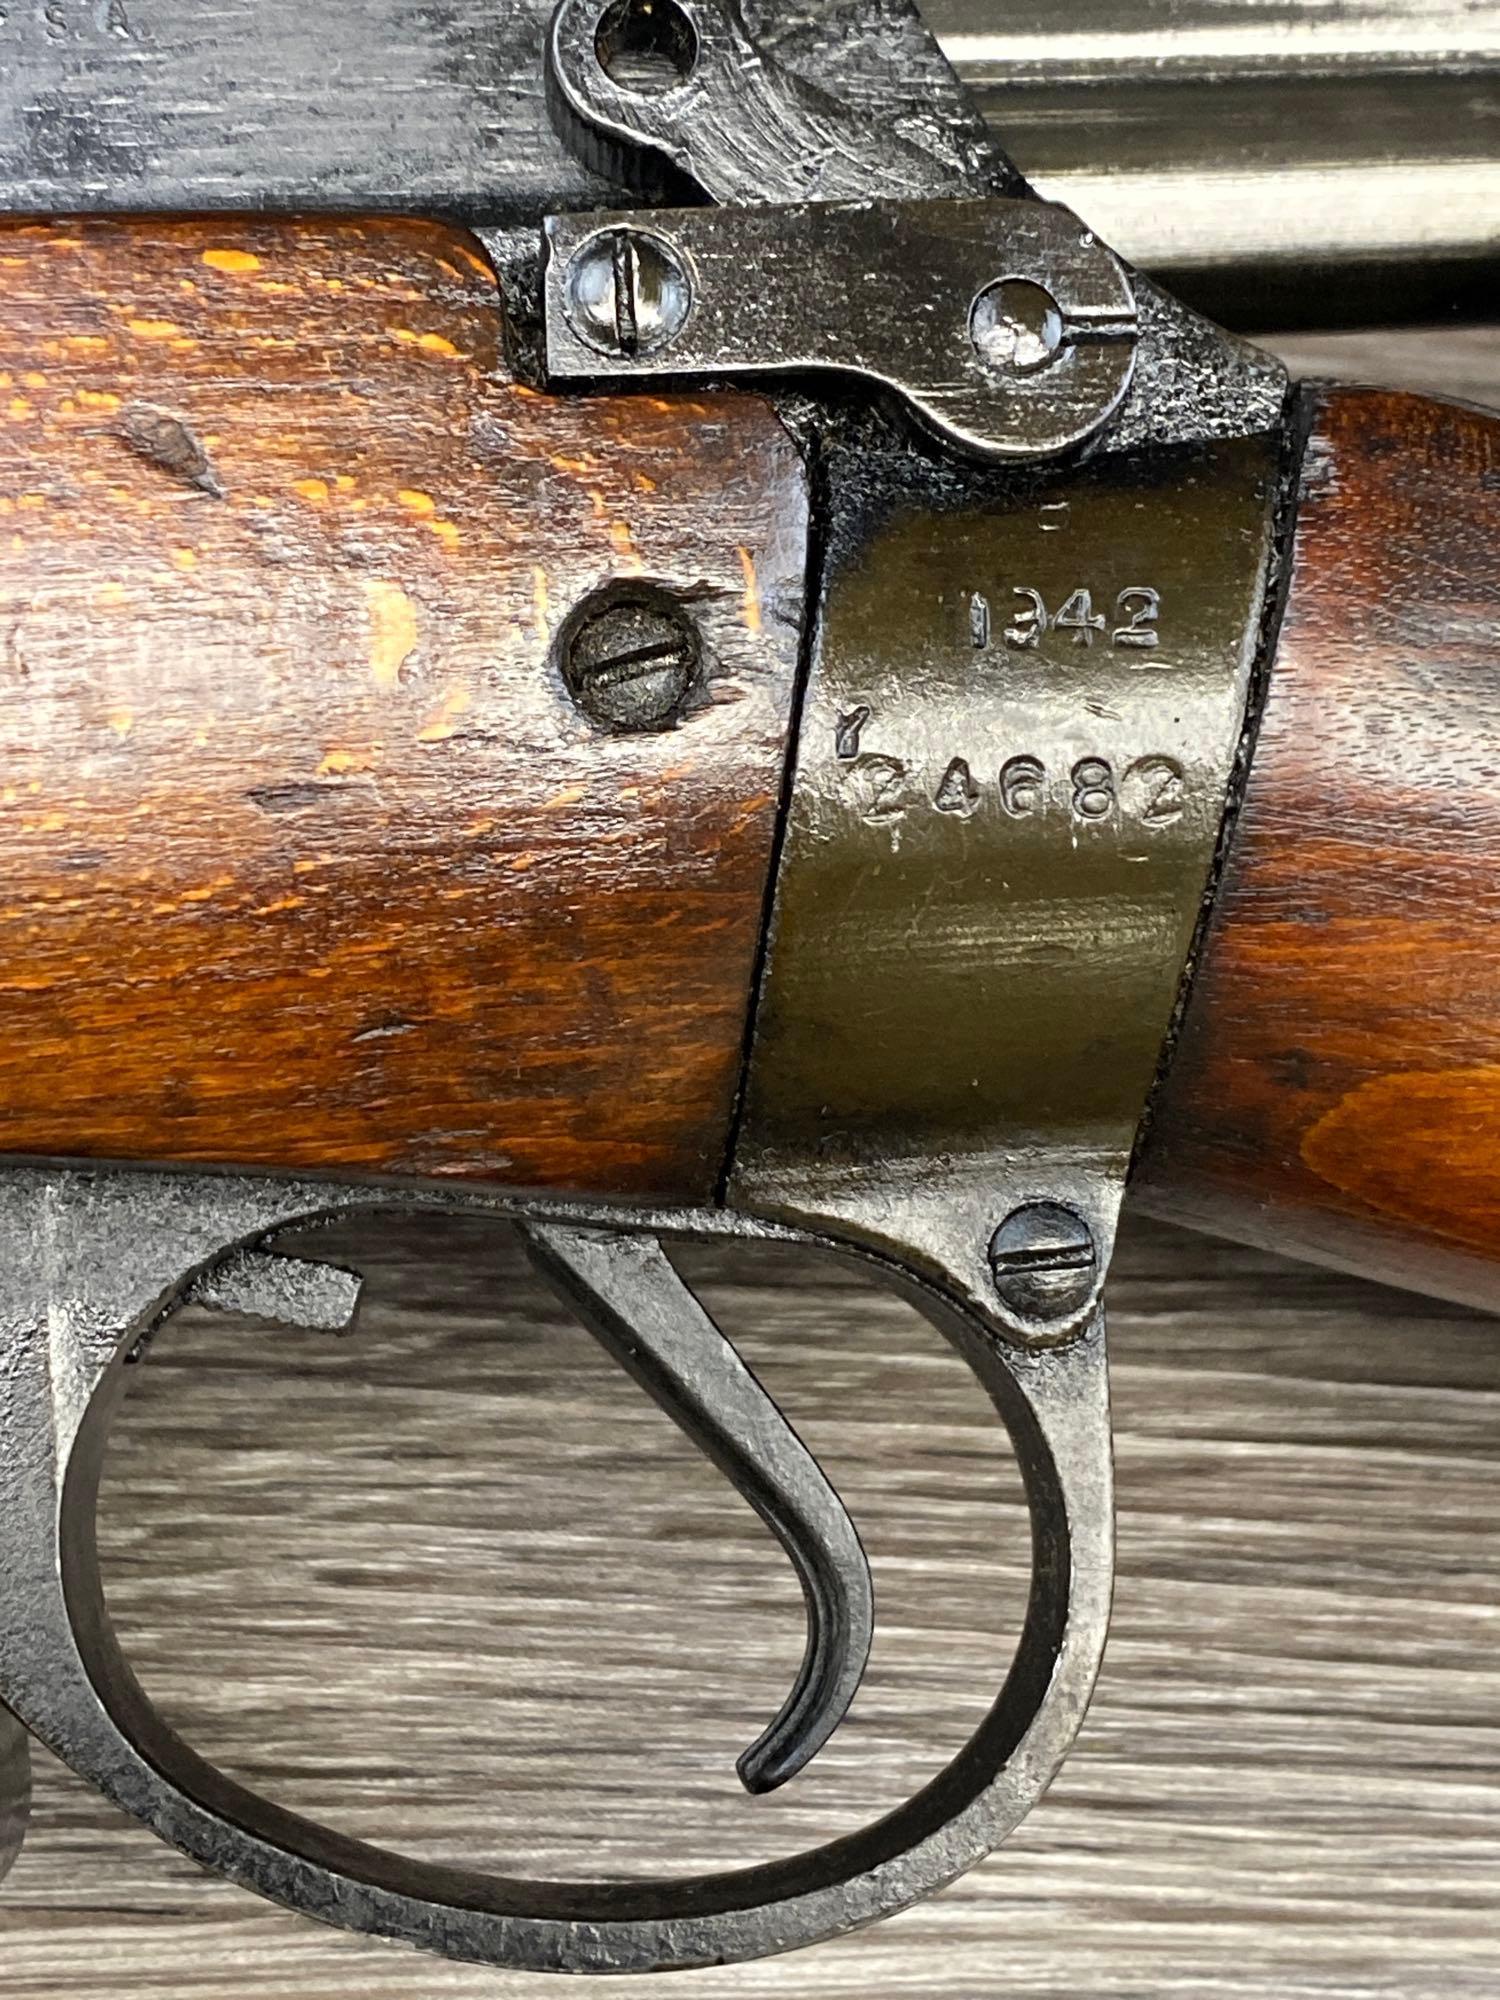 ENFIELD NO. 4 MK 2 .303 BOLT-ACTION RIFLE w/SCOPE